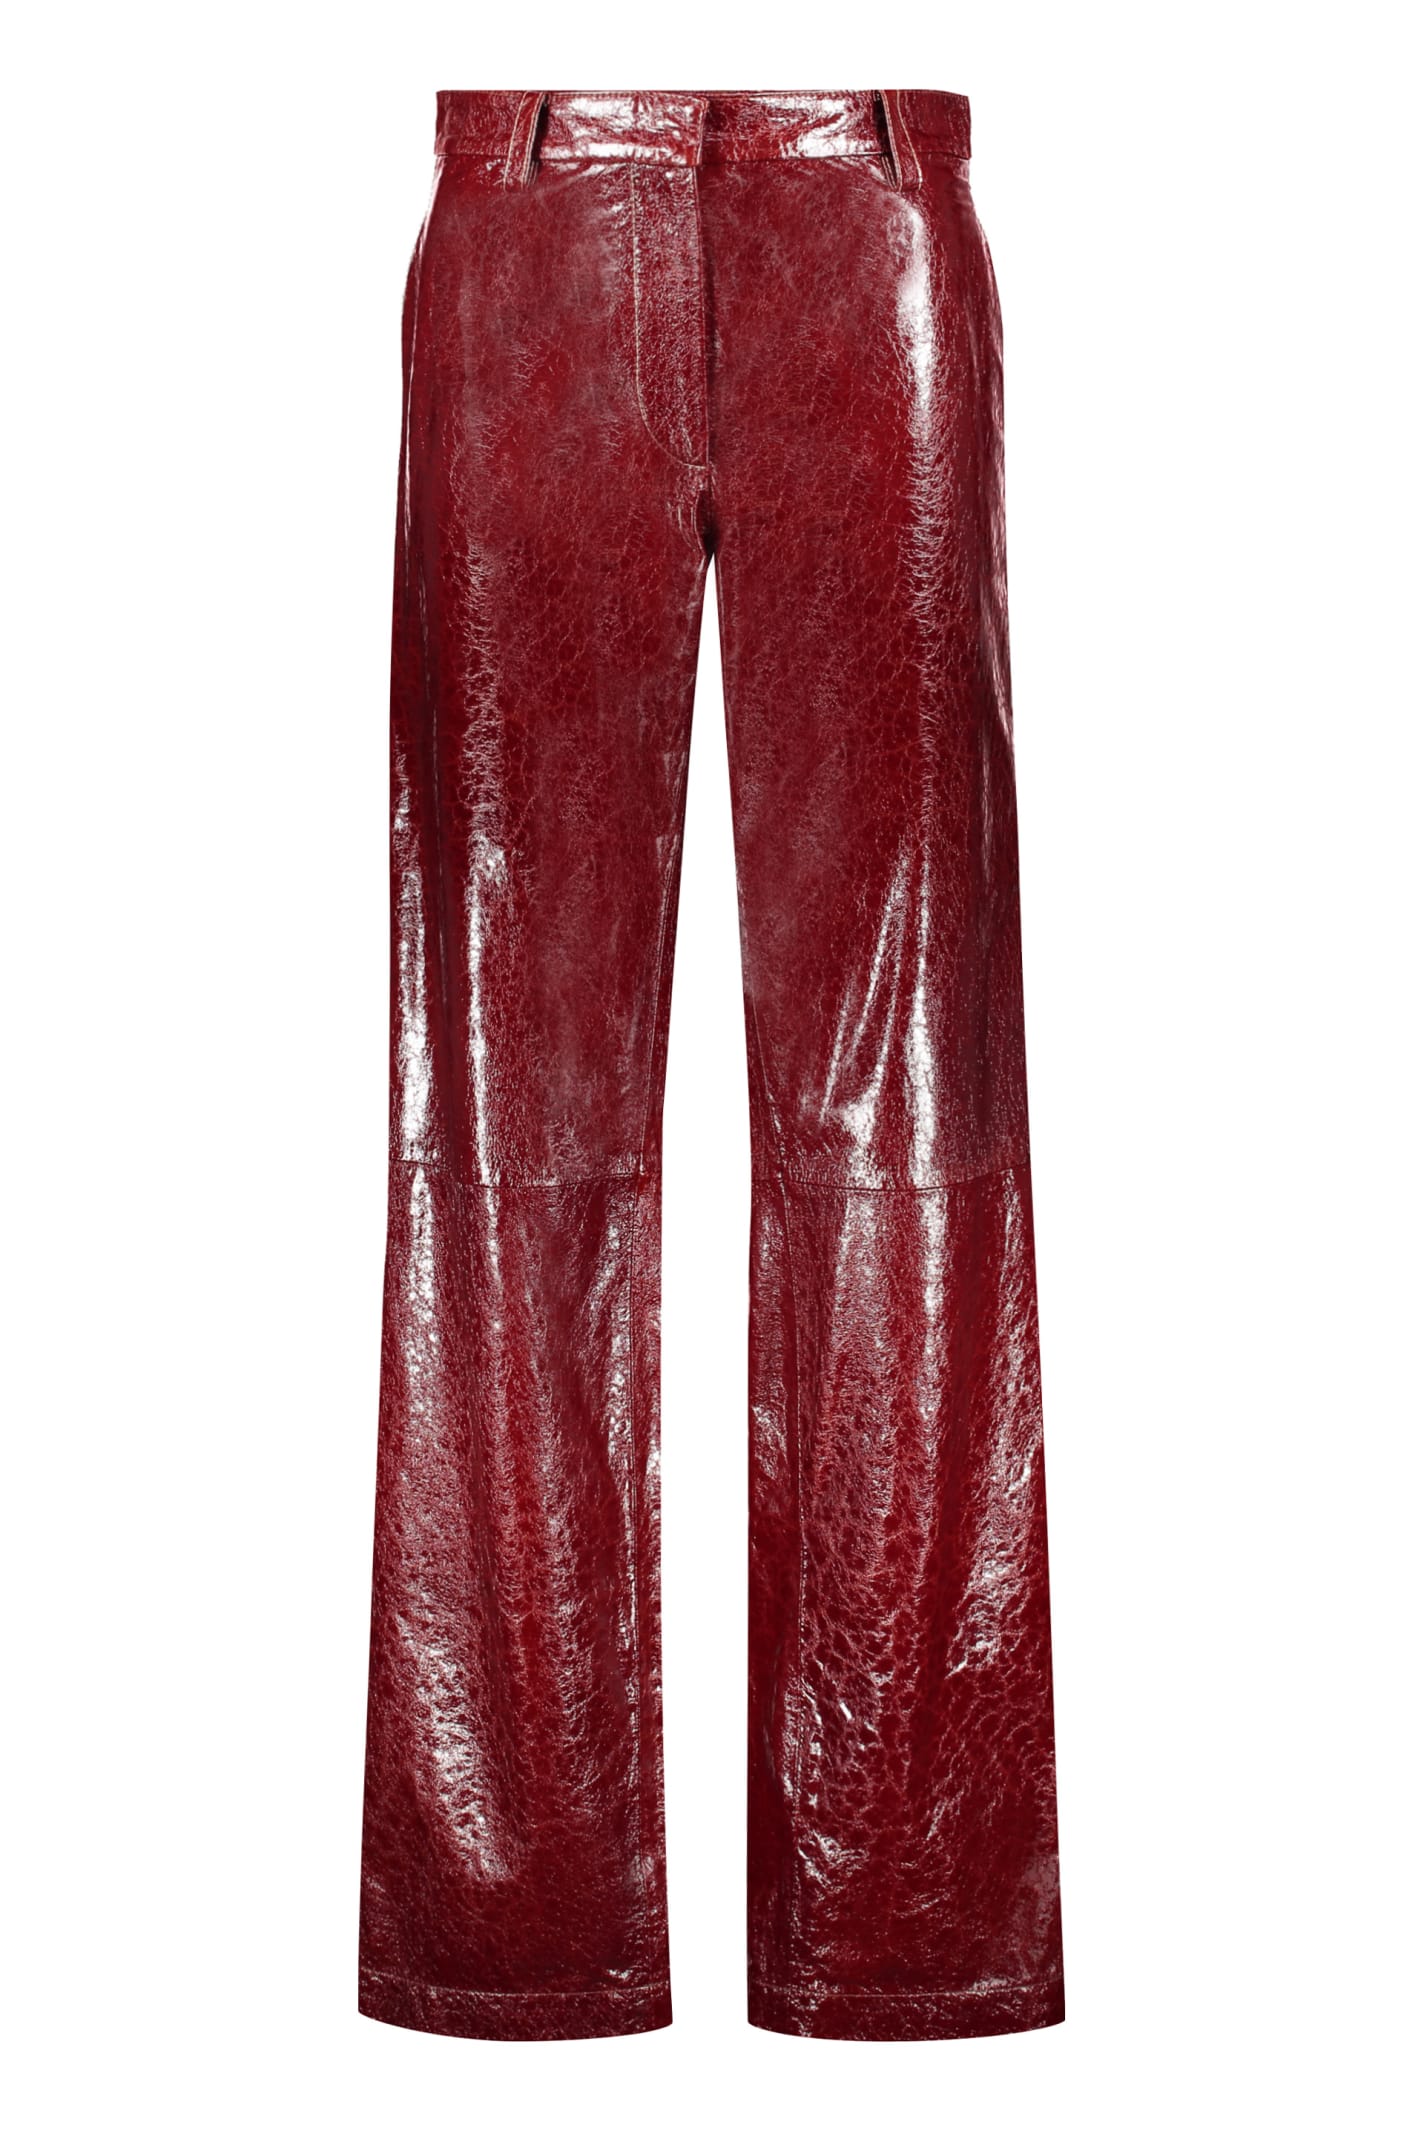 Missoni Leather Trousers In Burgundy